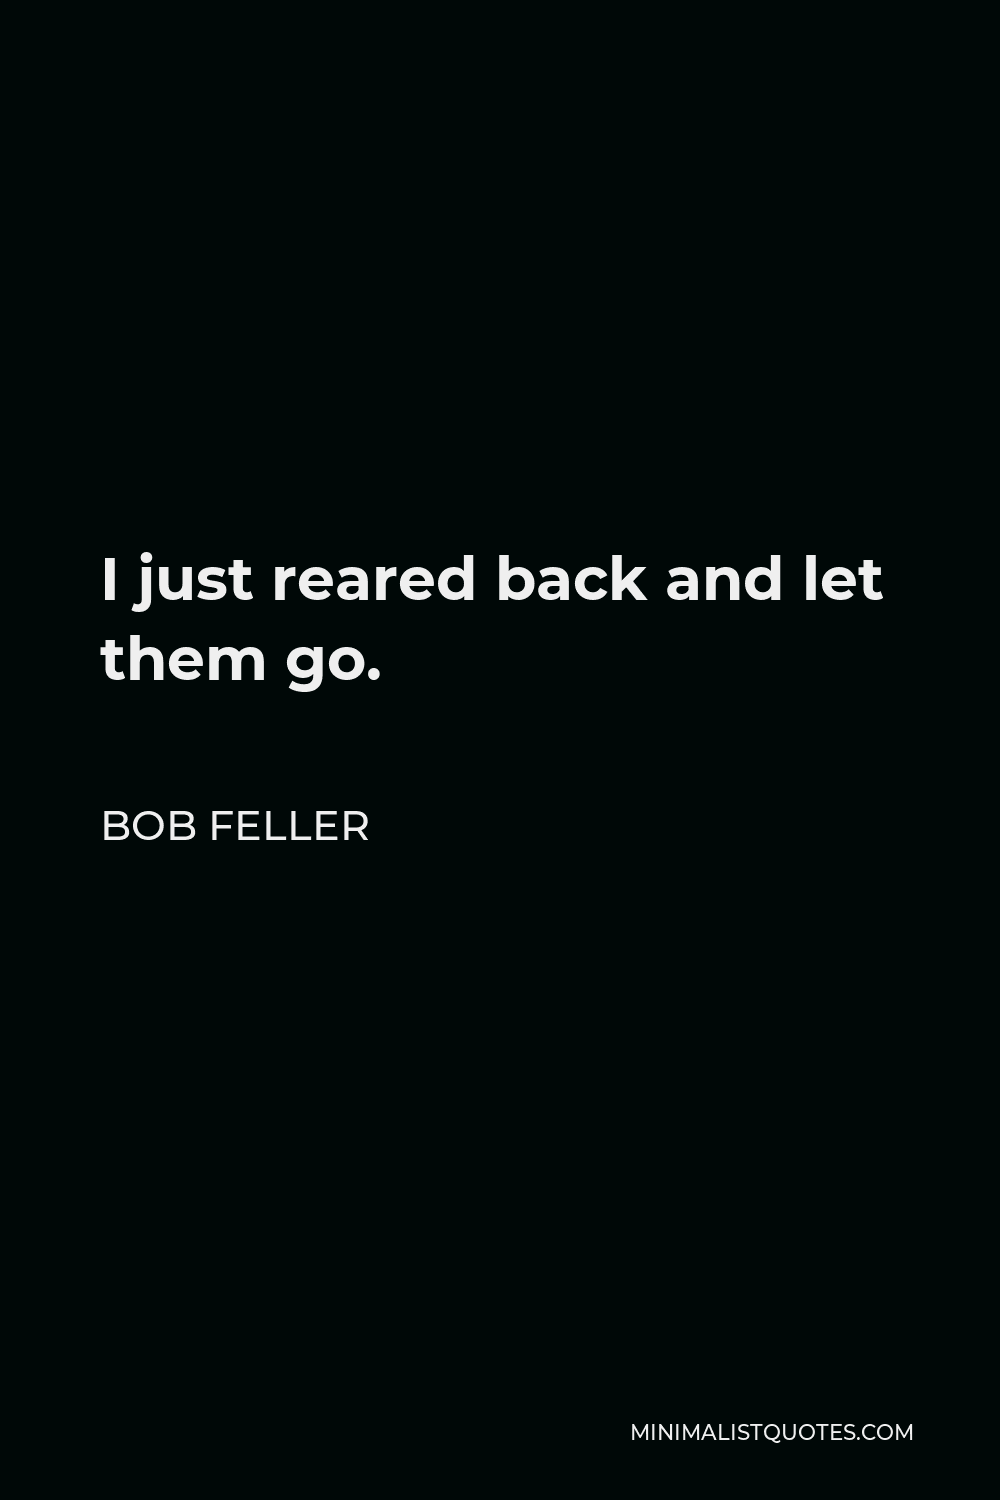 Bob Feller Quote - I just reared back and let them go.